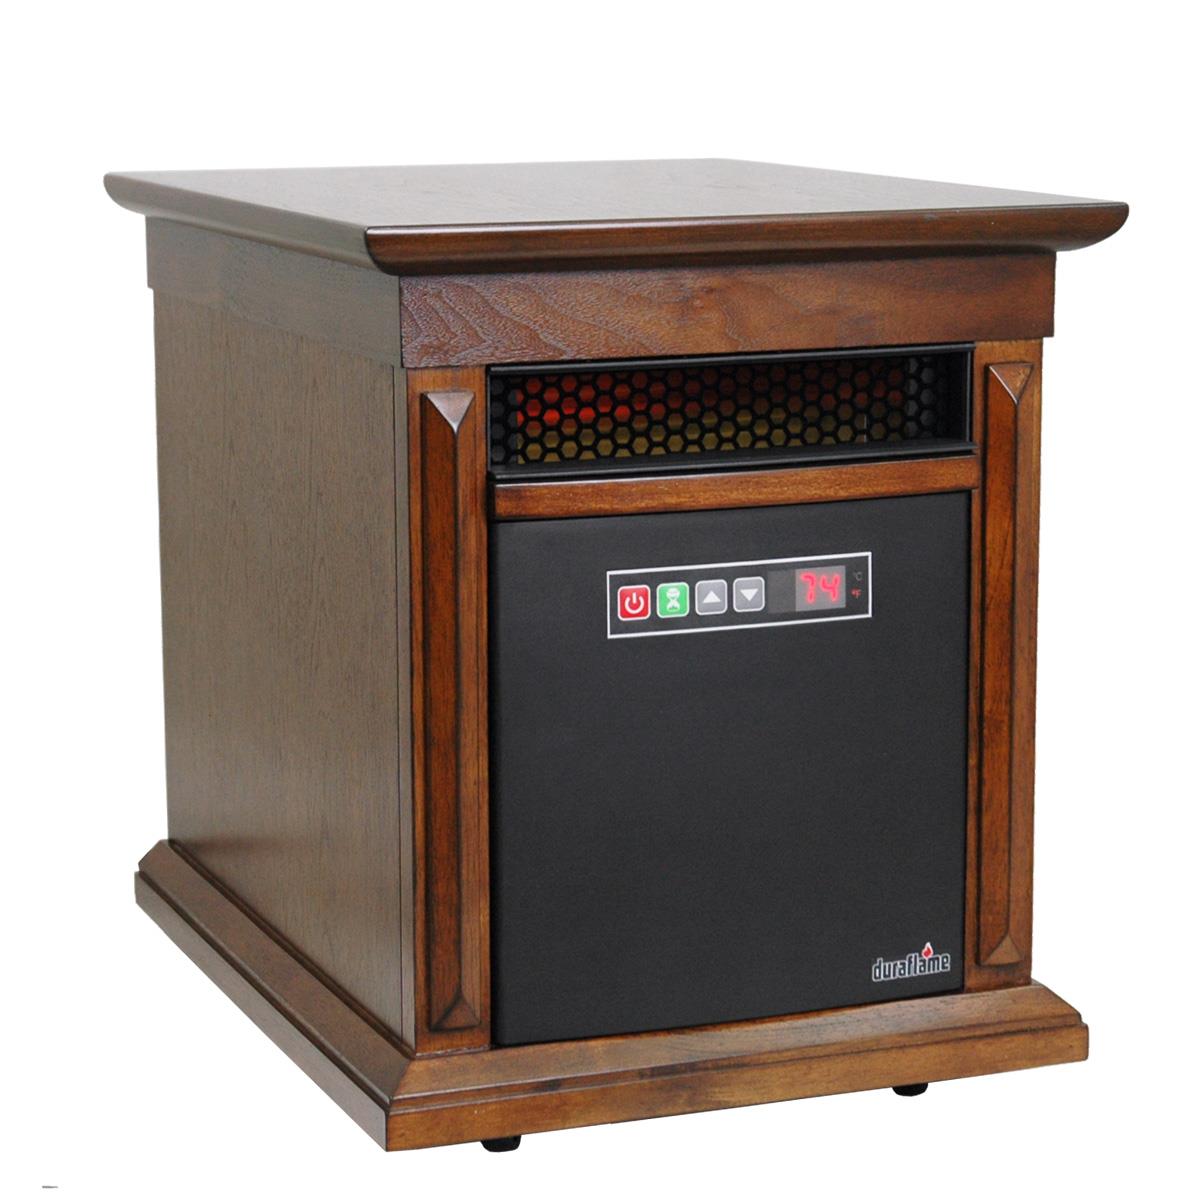 Duraflame Fireplace Heater Lovely Duraflame Portable Electric Stove Heater Laptop 13 3